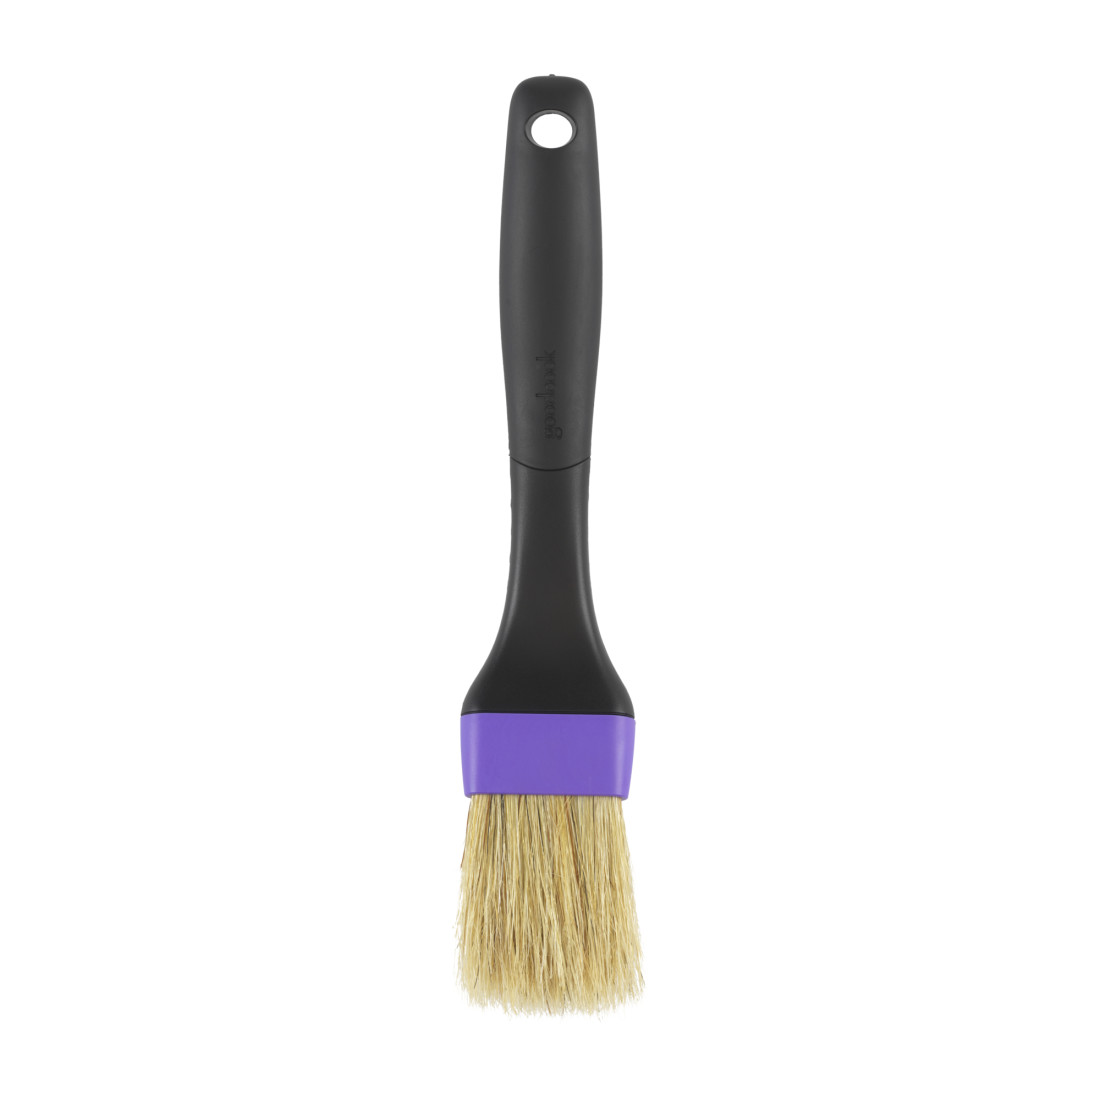 Mane Brush Baking Basting Cooking Baking Pastry Bread Brush, use a pastry  brush with natural bristles so the sauce or glaze is evenly spread and  better absorbed by your special goodies. flat